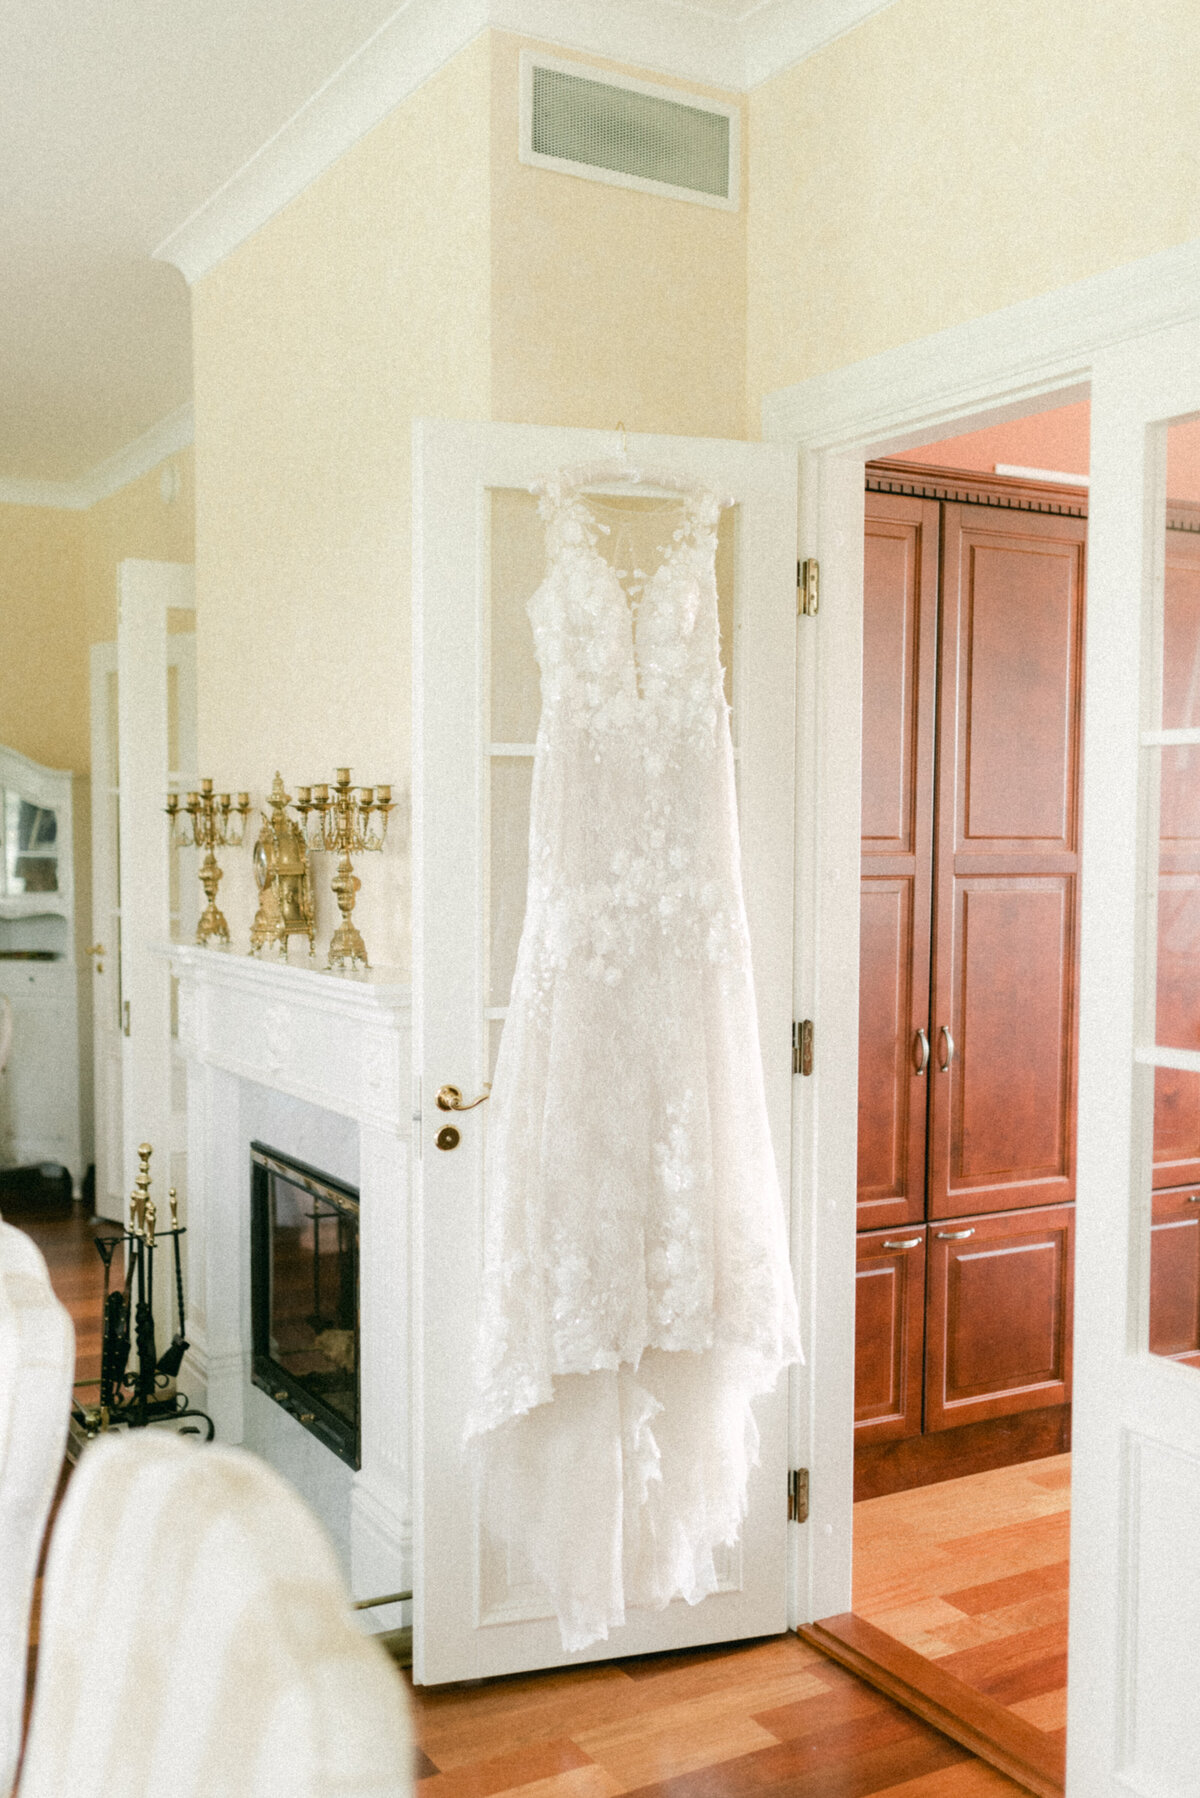 Wedding dress  hanging in the room photographed by wedding photographer Hannika Gabrielsson